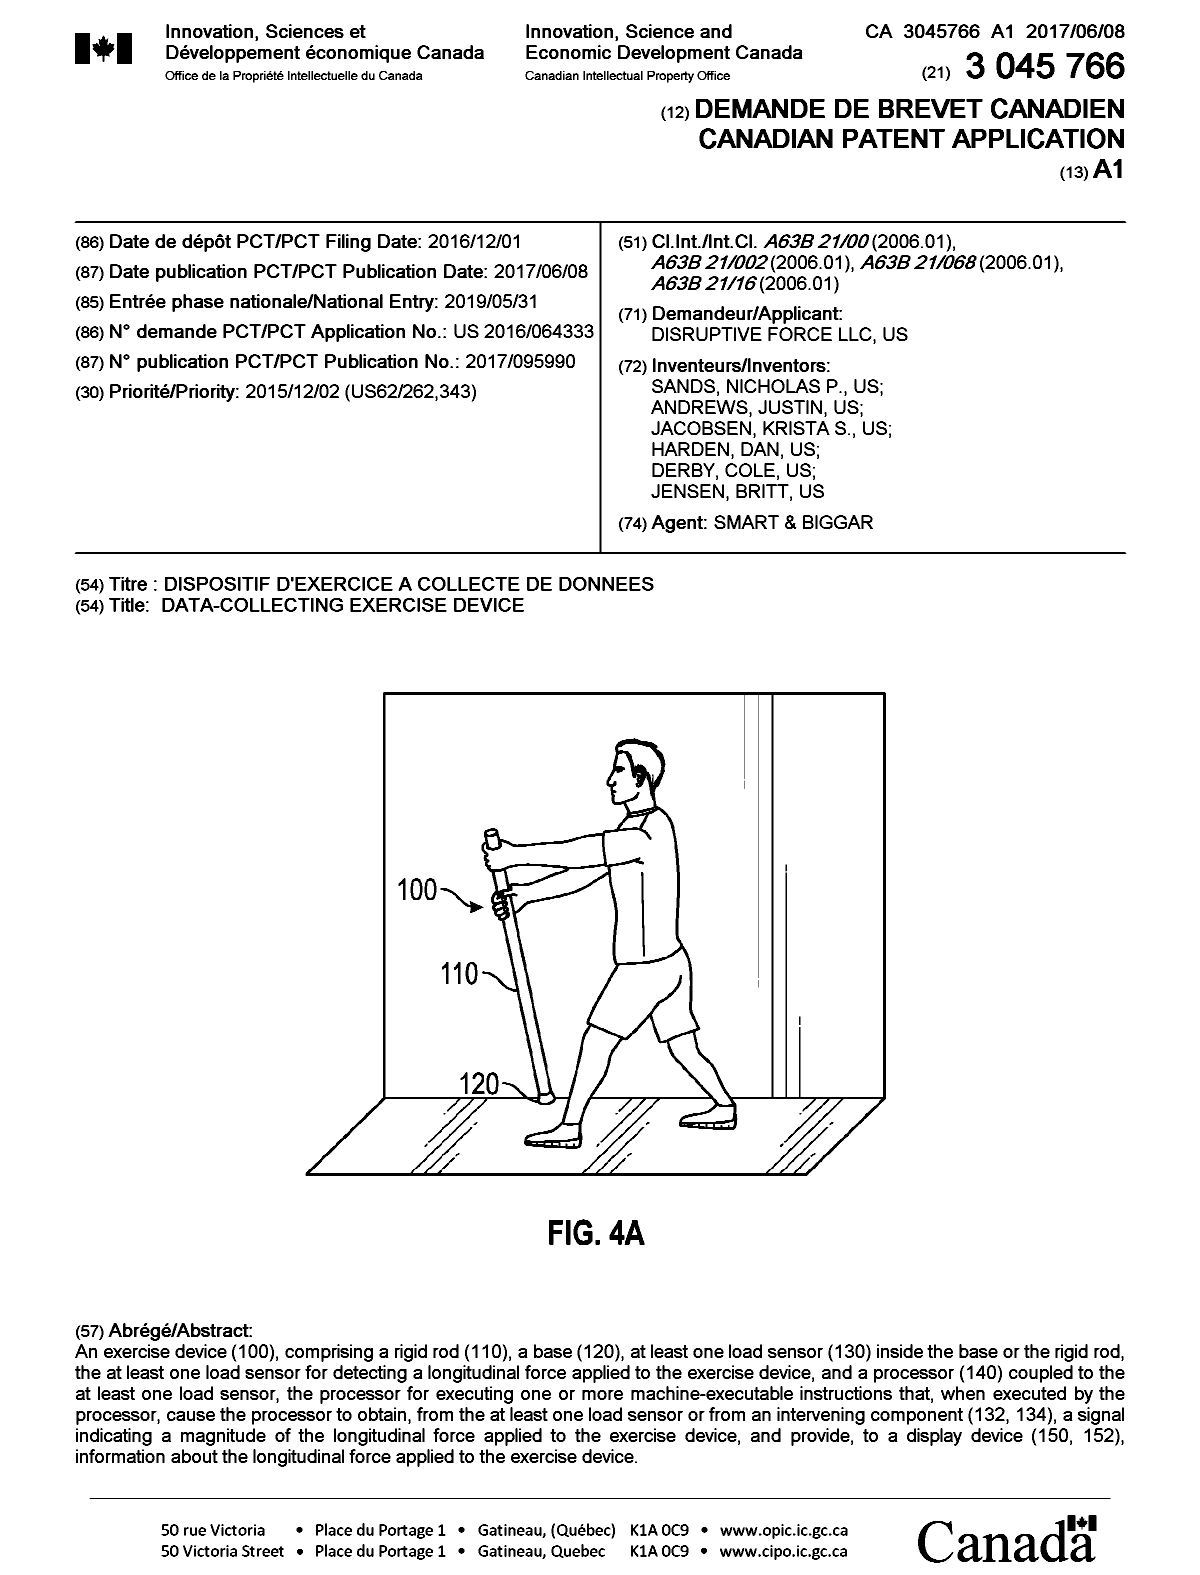 Canadian Patent Document 3045766. Cover Page 20190620. Image 1 of 1